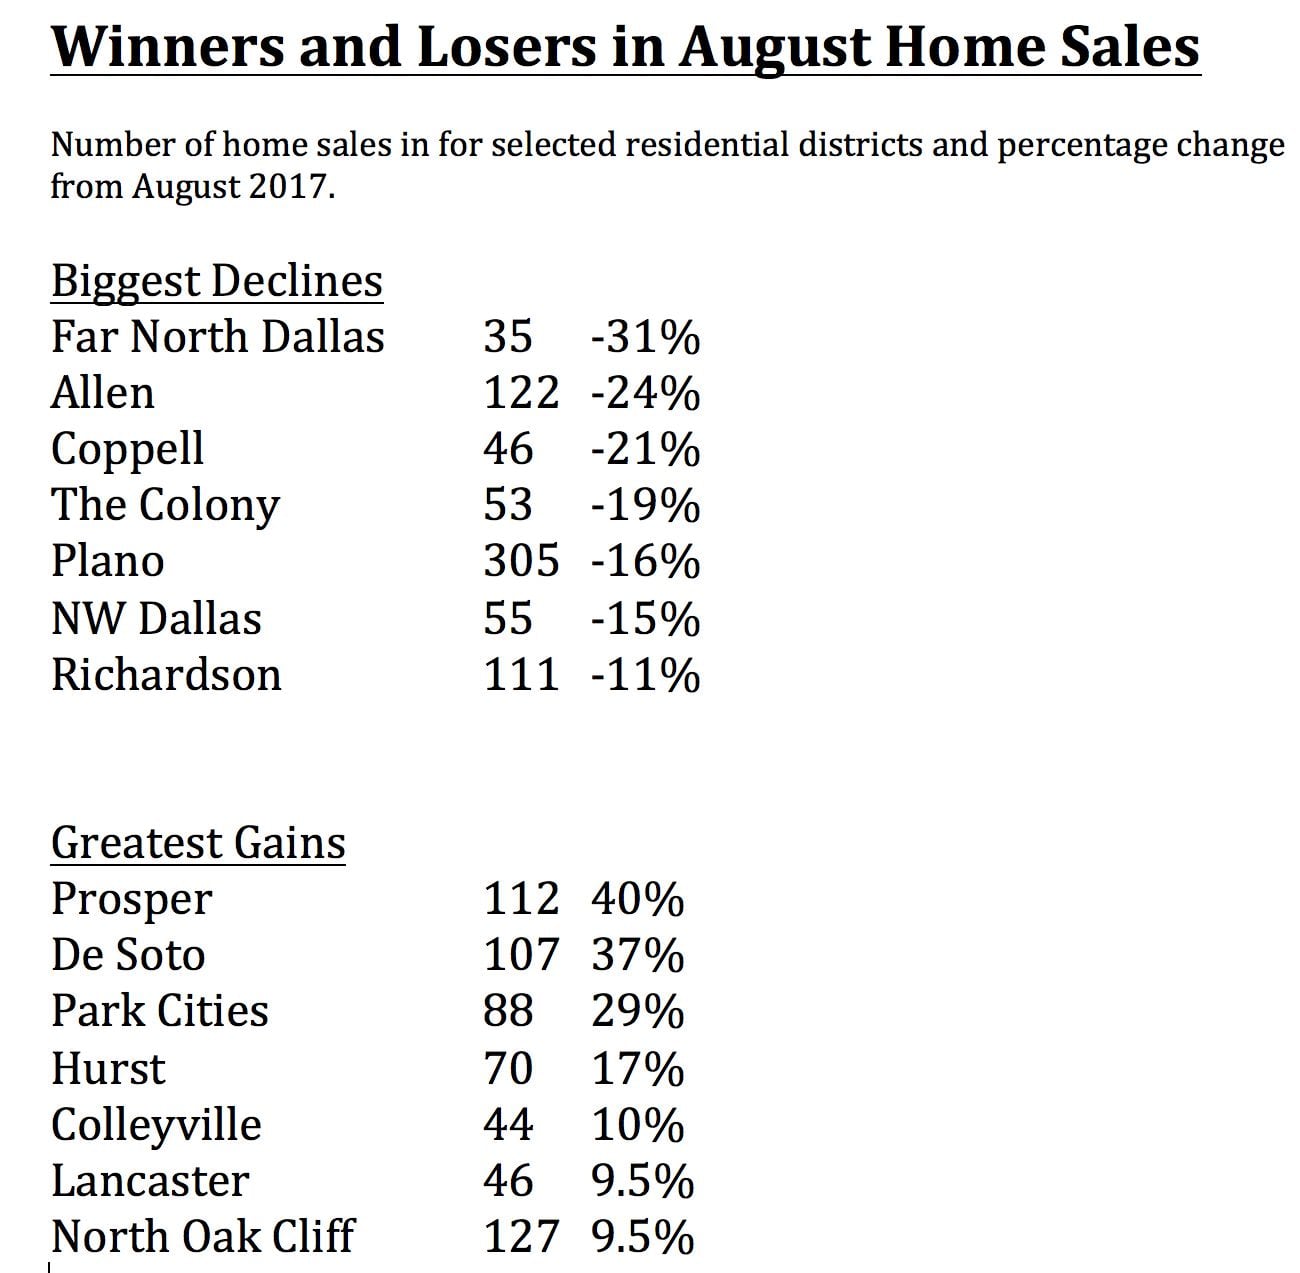 Source: North Texas Real Estate Information Services